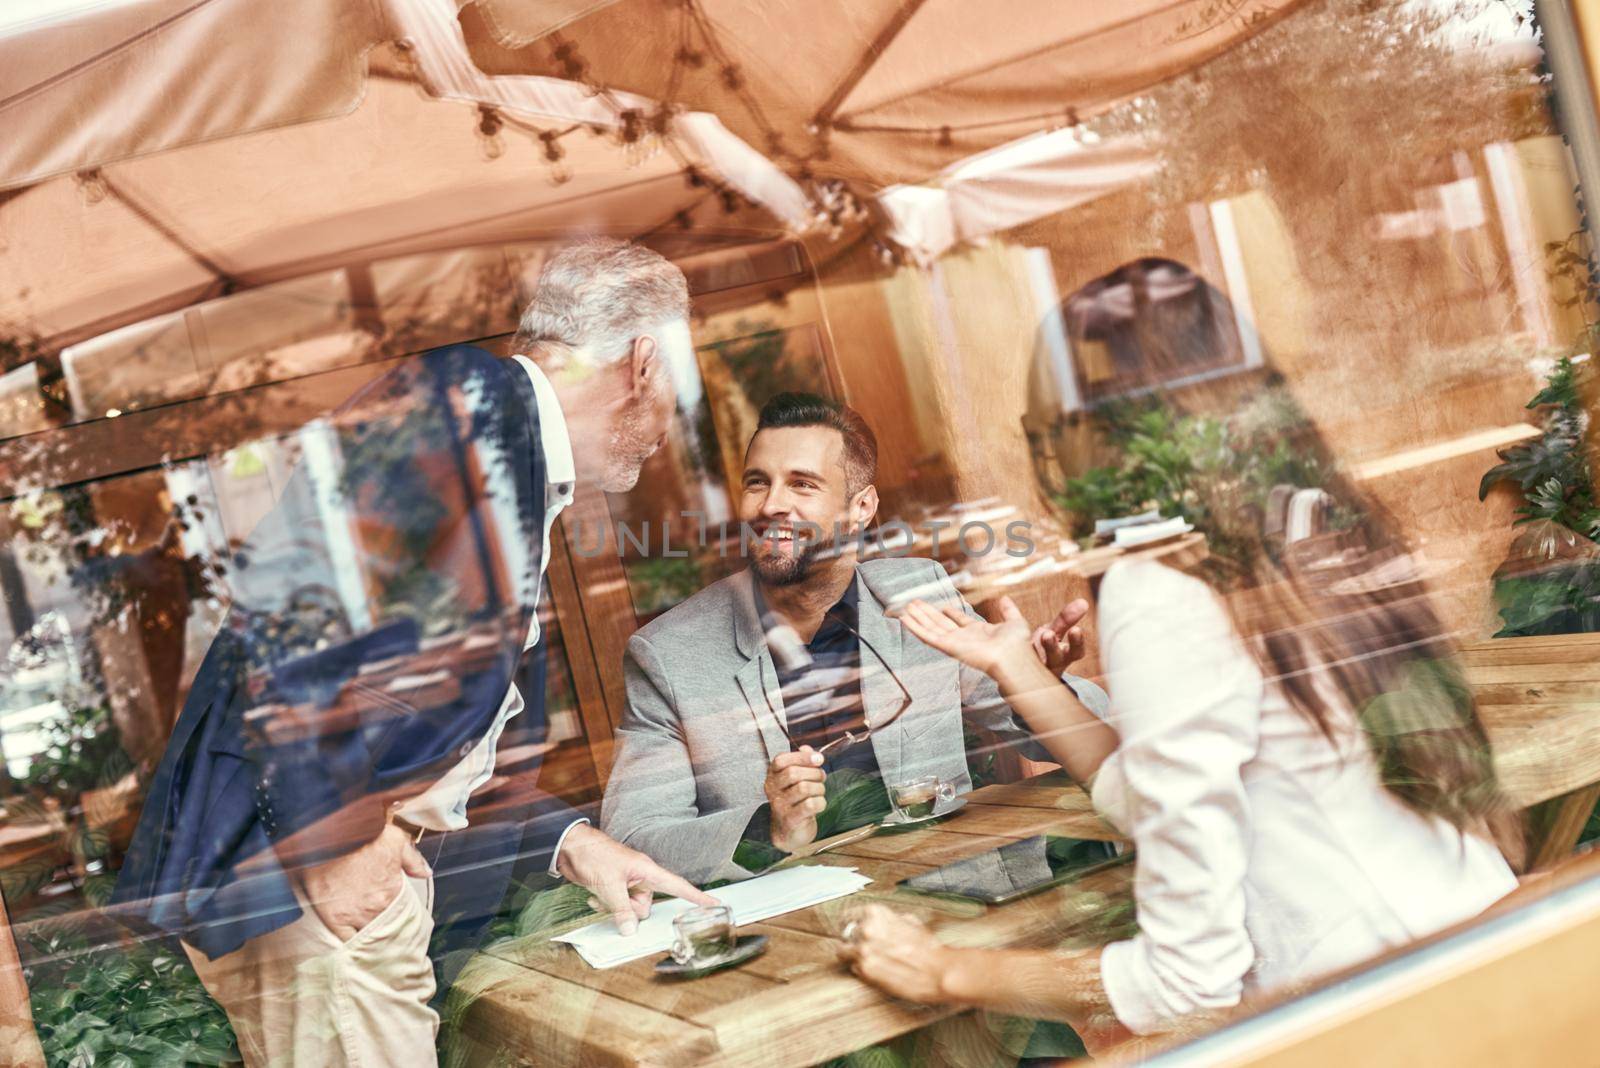 Business lunch. Three people in the restaurant sitting at table discussing project smiling happy outside the window view. Team work concept by friendsstock